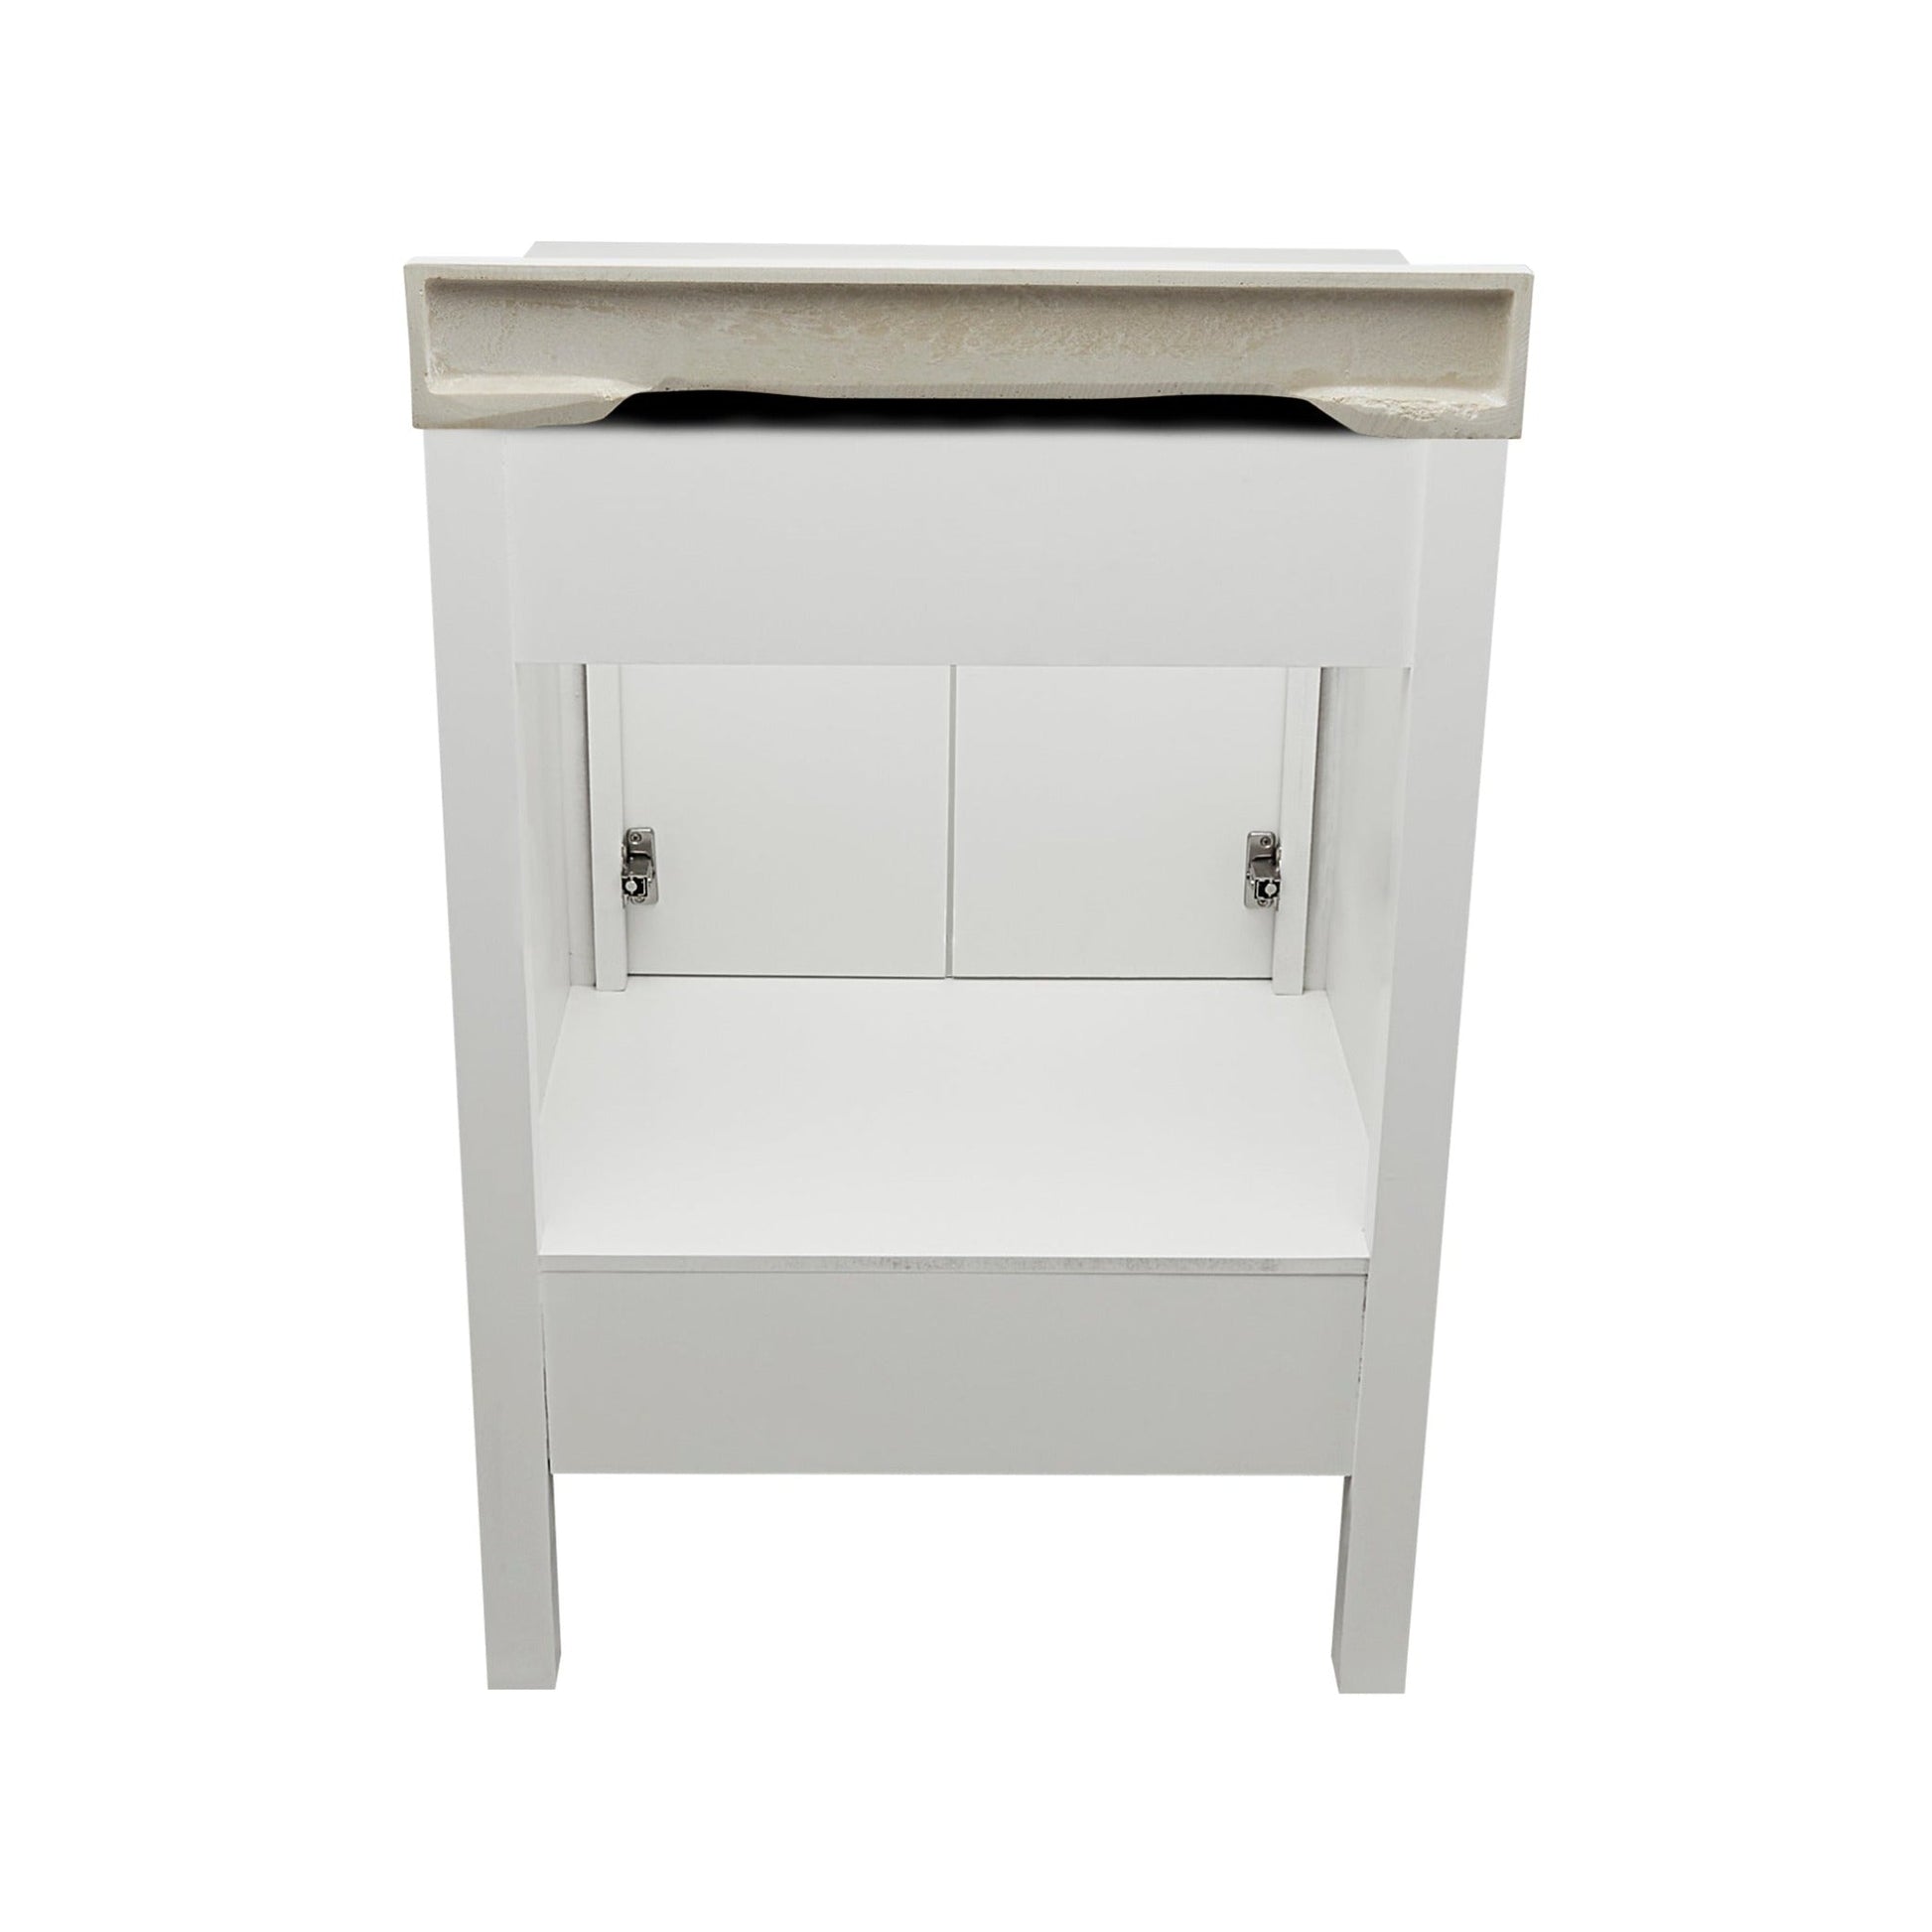 Ella’s Bubbles Nevado 25" White Bathroom Vanity With White Cultured Marble Top With White Backsplash and Sink